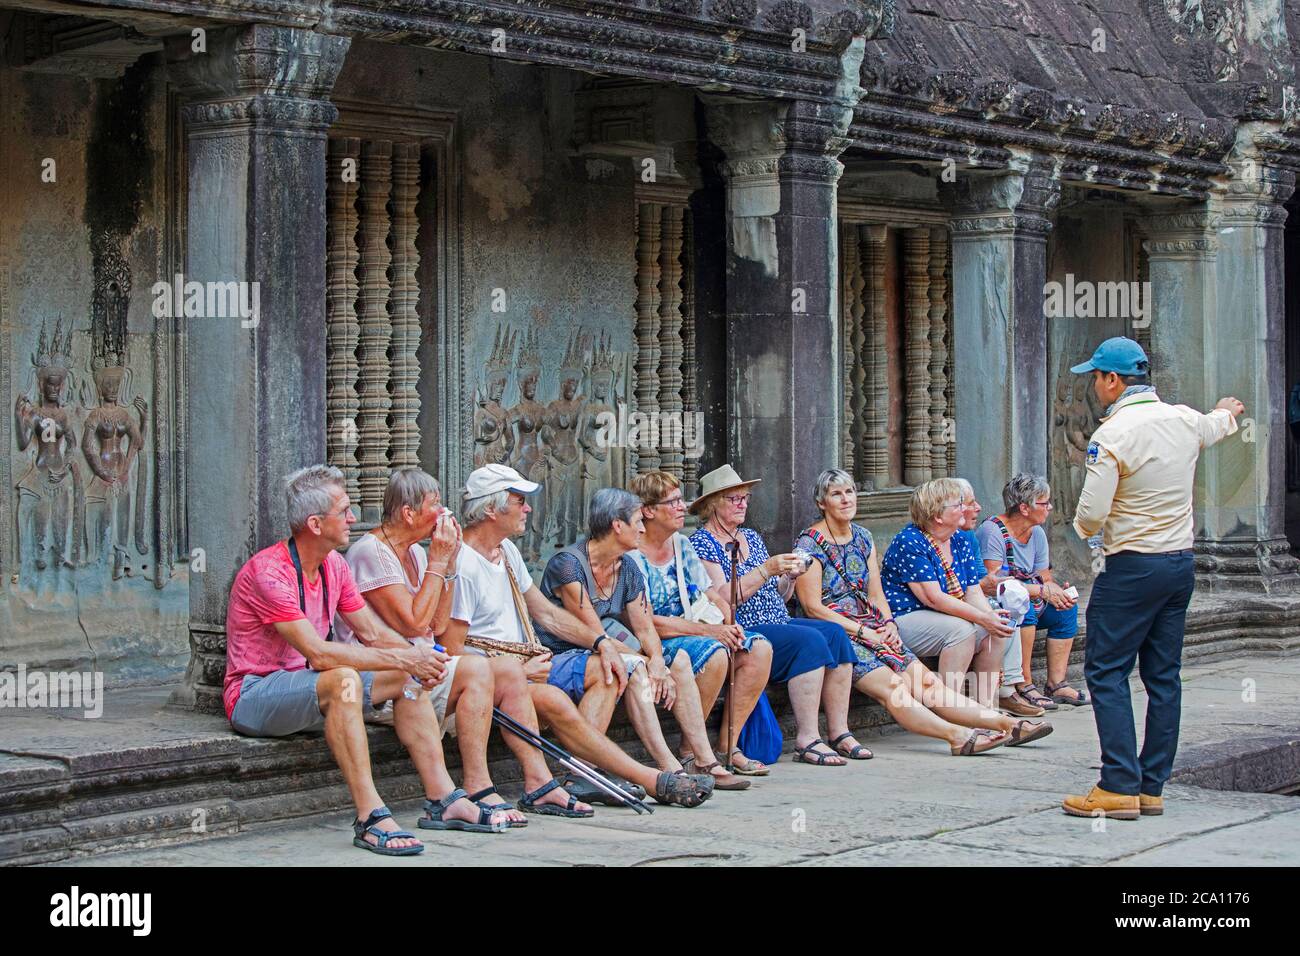 Western elderly tourists with guide visiting the 12th century temple complex Angkor Wat, dedicated to the god Vishnu, Siem Reap, Cambodia, Asia Stock Photo